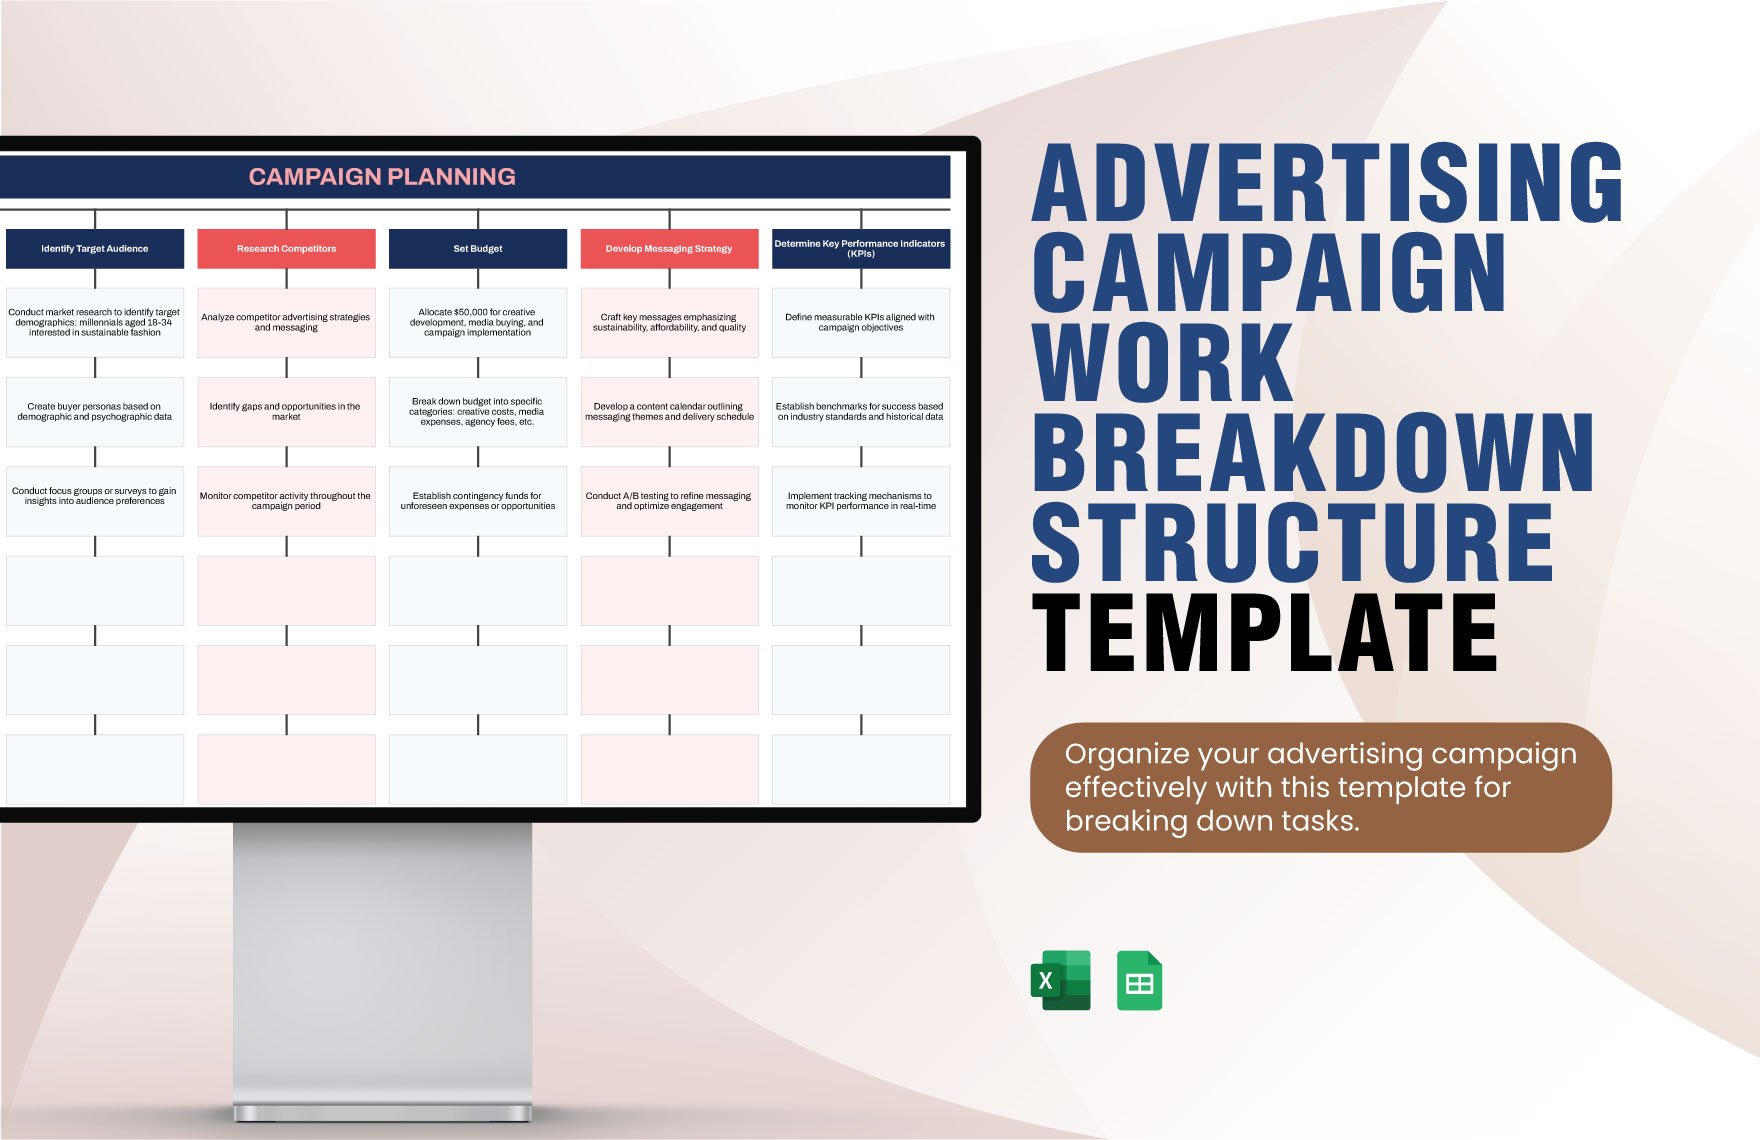 Advertising Campaign Work Breakdown Structure Template in Excel, Google Sheets